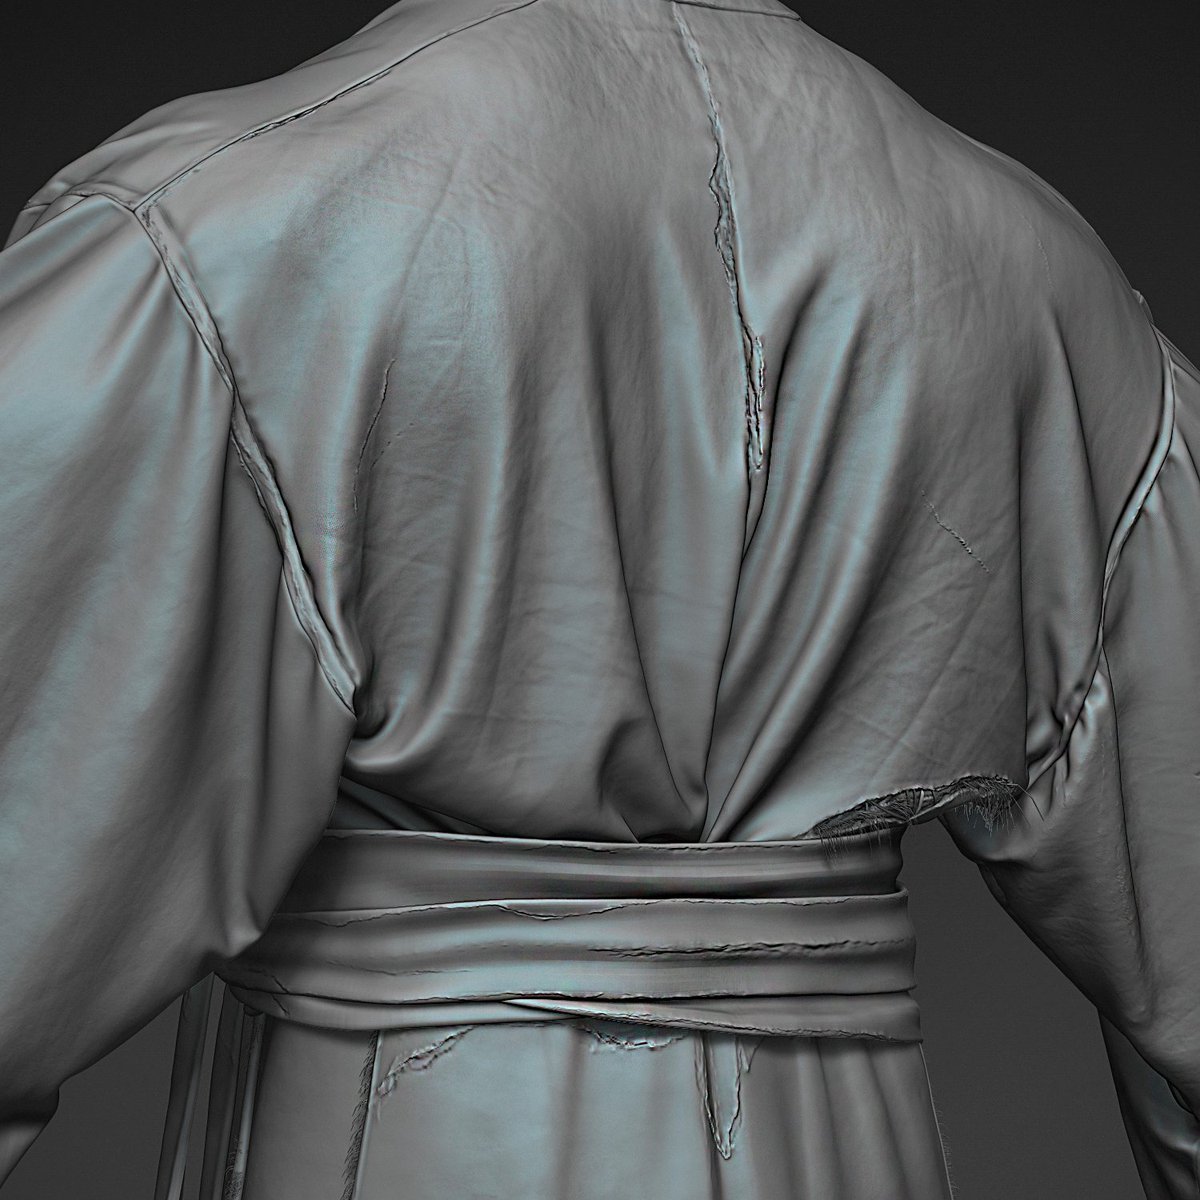 Very excited to share my latest 3D modeling project! Here's my hakama, created from scratch using Marvelous Designer and detailed in ZBrush. 🎨✨#3DModeling #Hakama
#MarvelousDesigner #ZBrush #DigitalArt #3DCreation #VirtualDesign #Creativity #PerfectDetail #PassionForArt